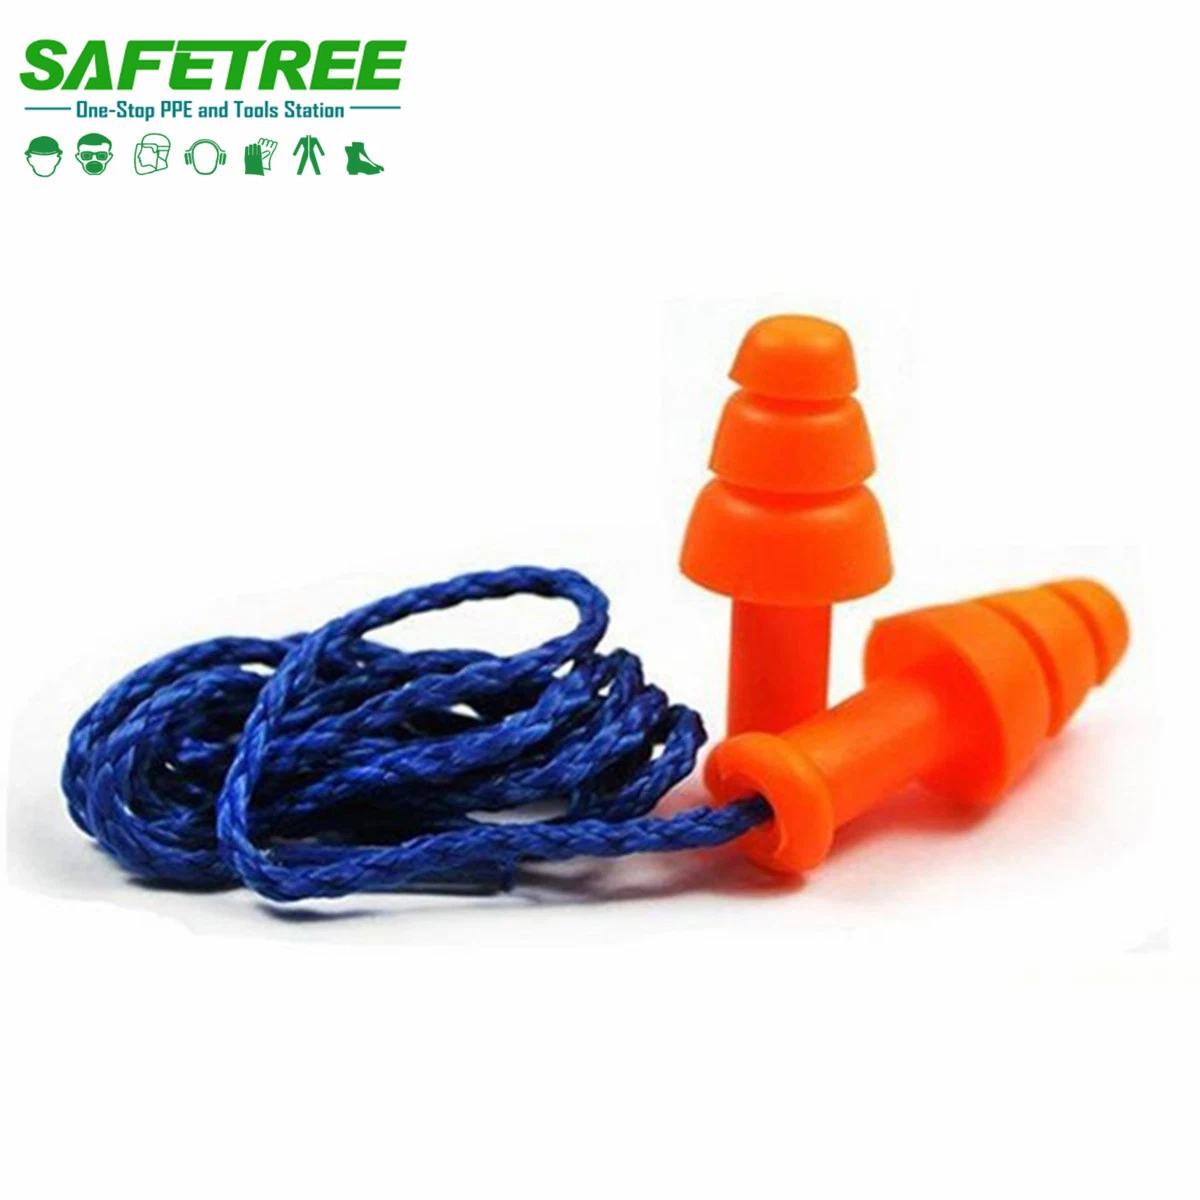 Safetree Soft Silicone Ear Plugs with String PPE Hearing Protection Corded Silicone Ear Plugs Snr 29dB Protective Ear Plugs with String